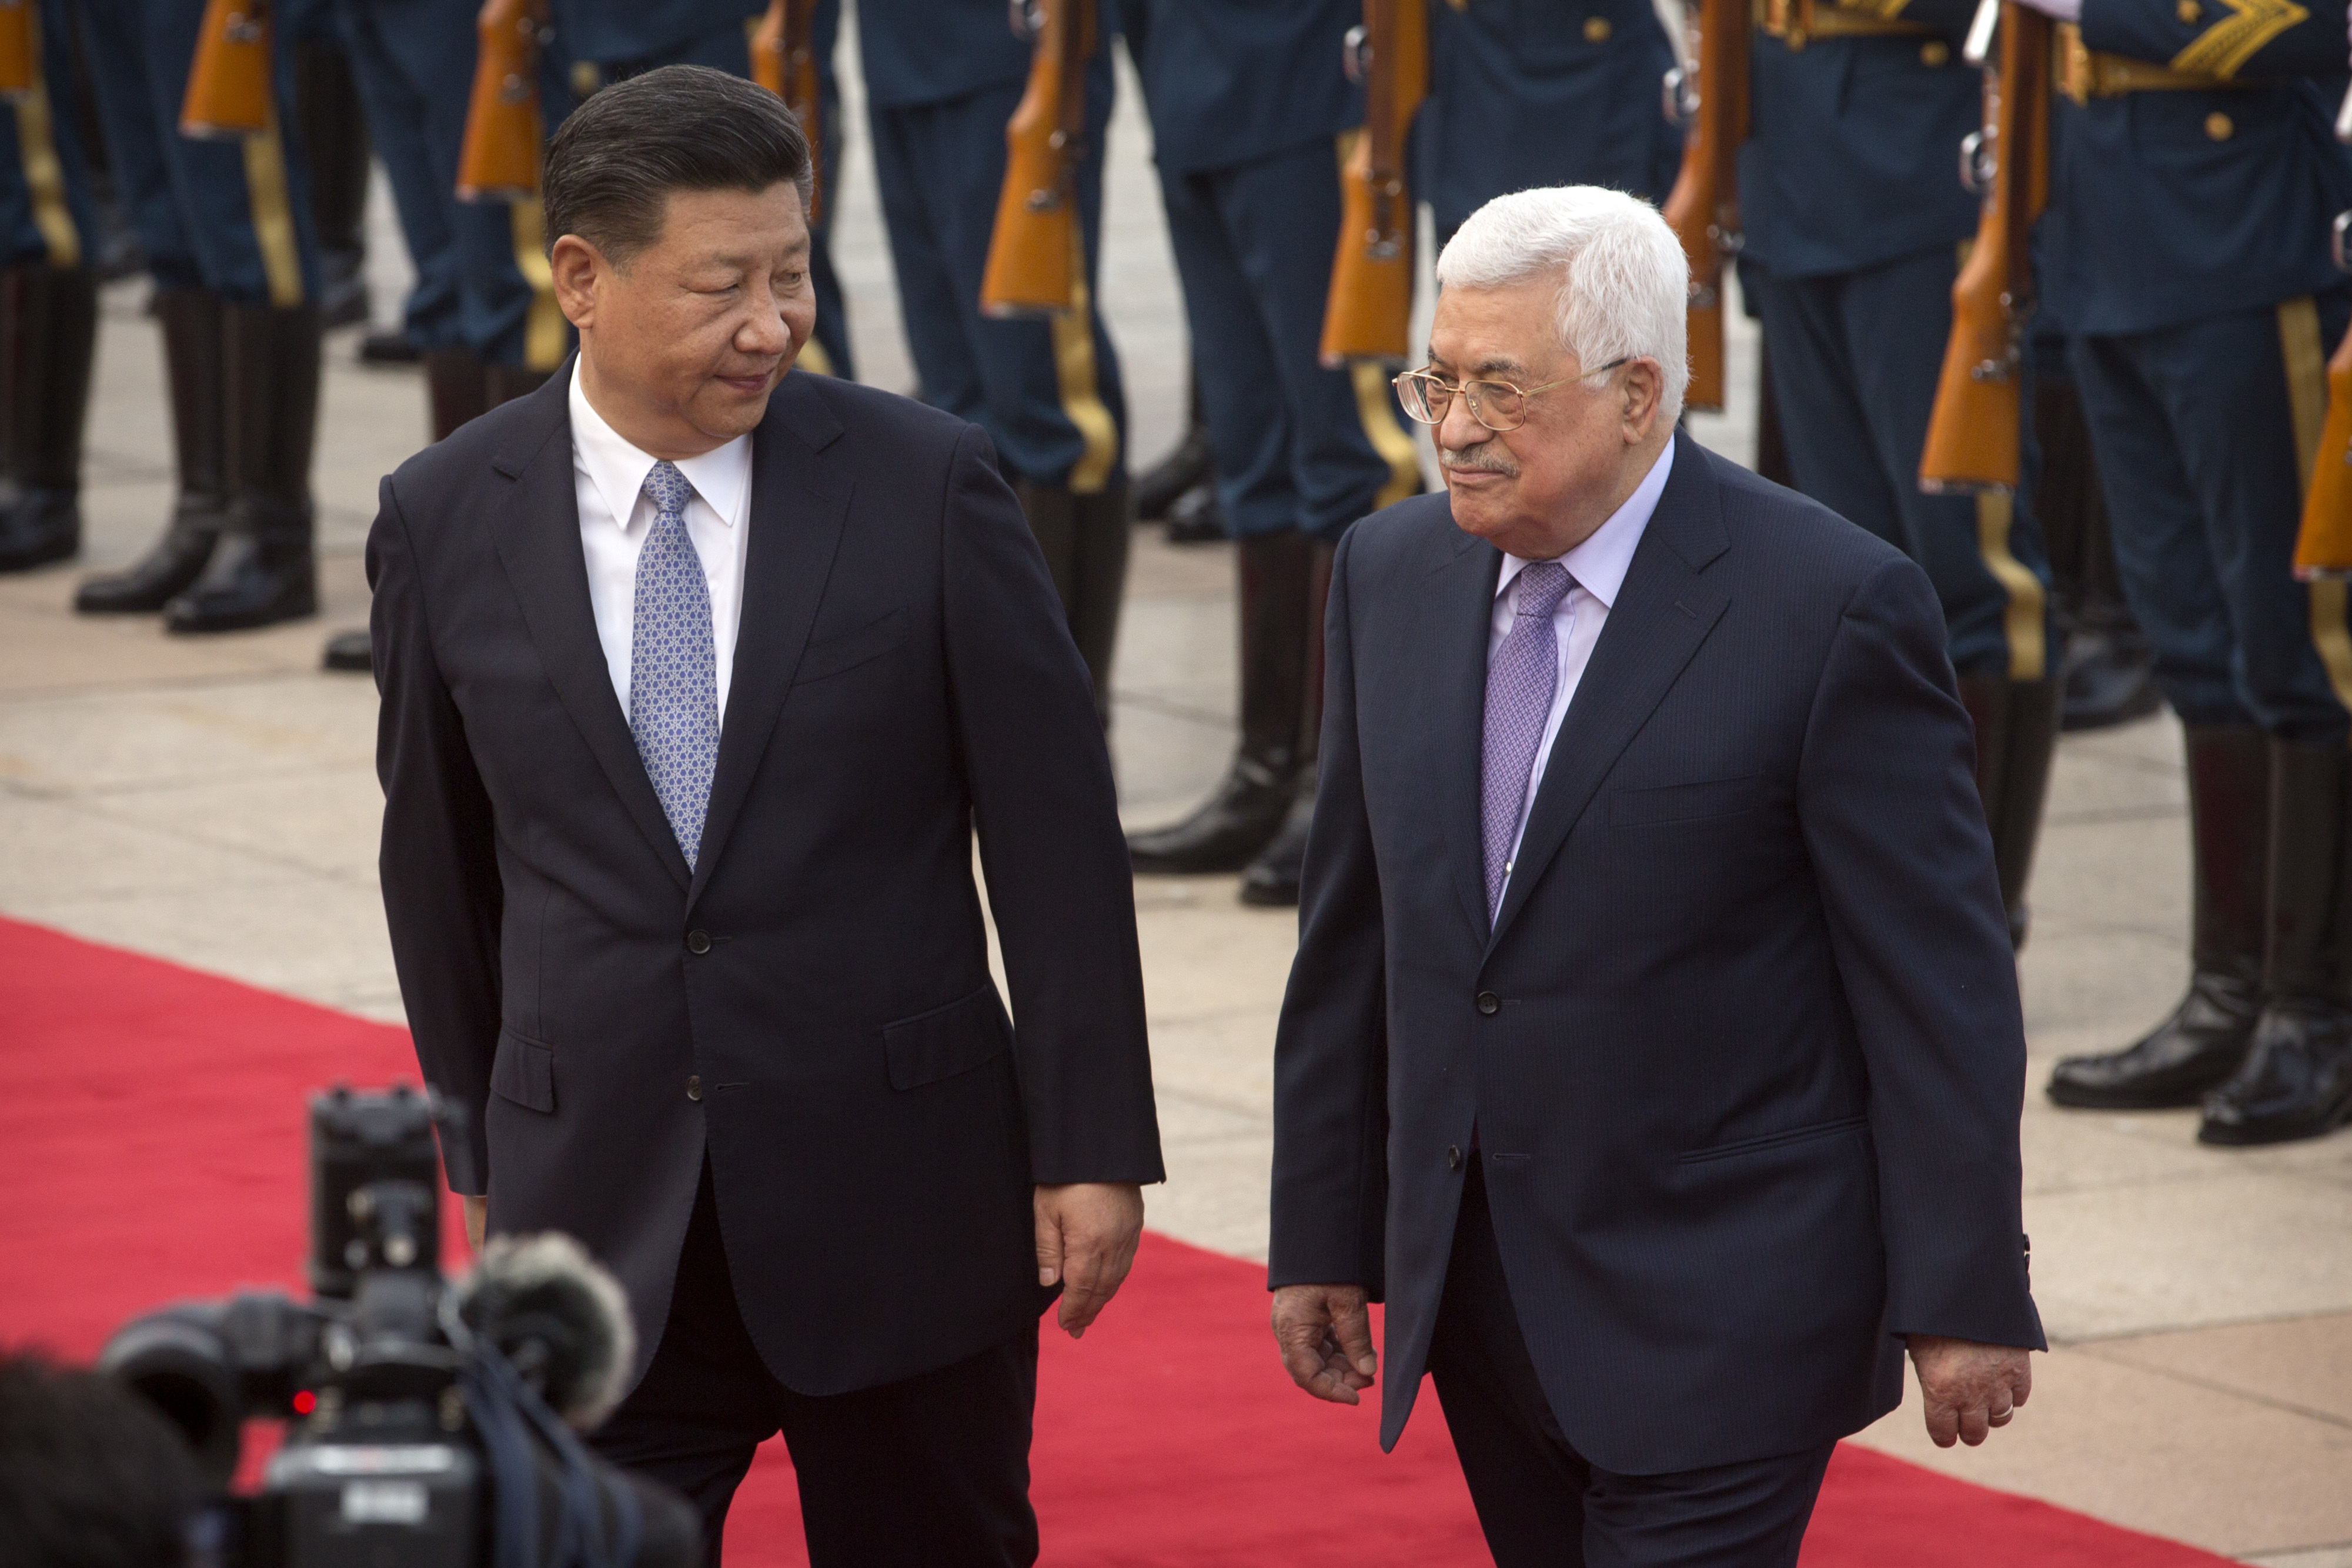 Chinese President Xi Jinping, left, looks at Palestinian President Mahmoud Abbas, right, as they walk together during a welcome ceremony at the Great Hall of the People in Beijing, Tuesday, July 18, 2017. (AP Photo/Mark Schiefelbein)